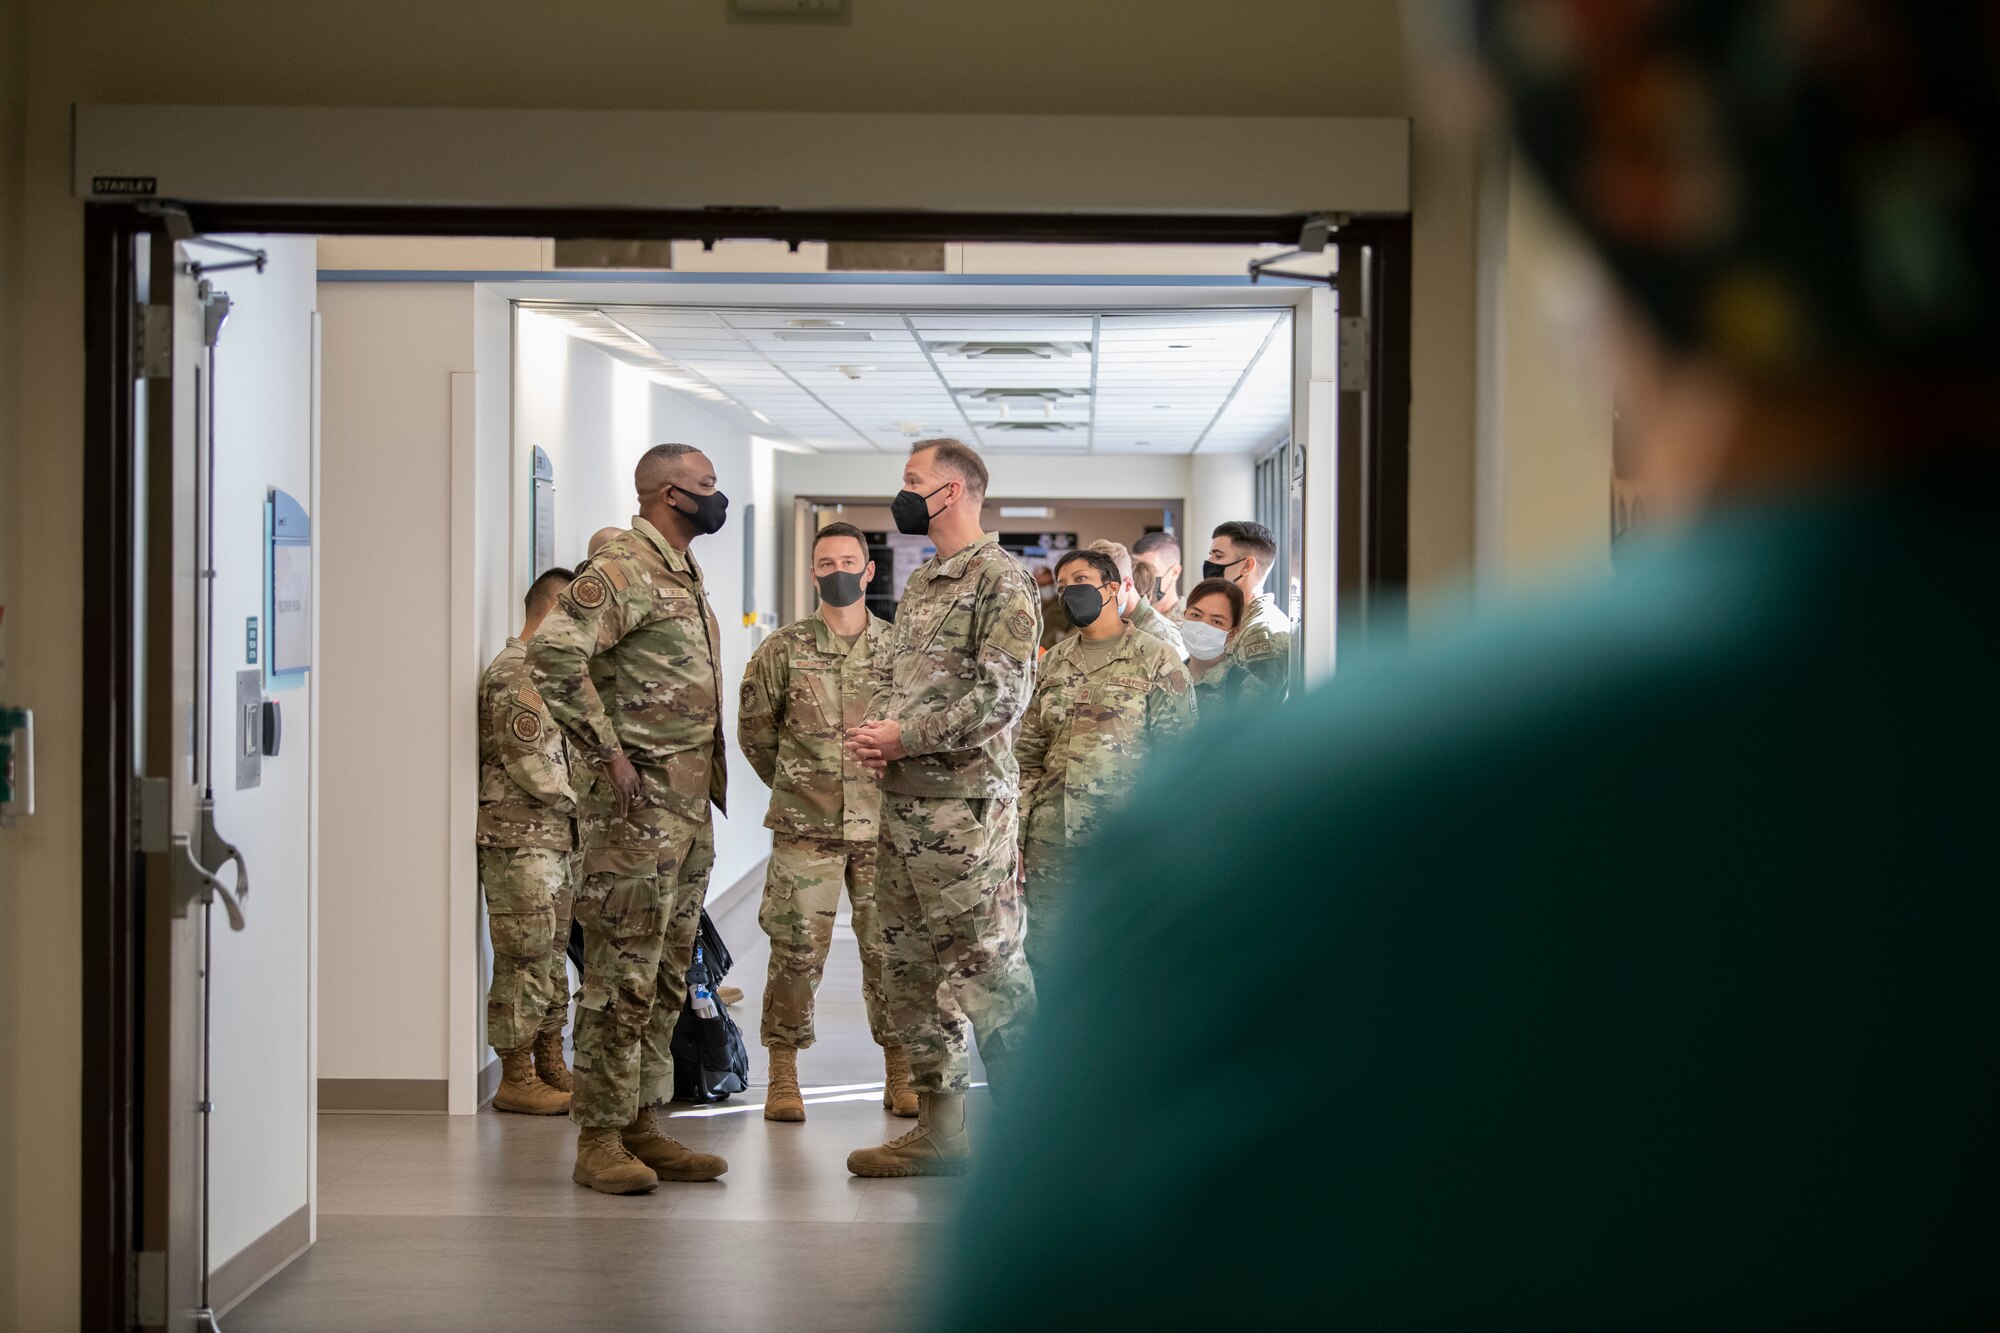 A group of Airmen stand in the hallway at David Grant USAF Medical Center, Travis Air Force Base, California, Oct. 12, 2022